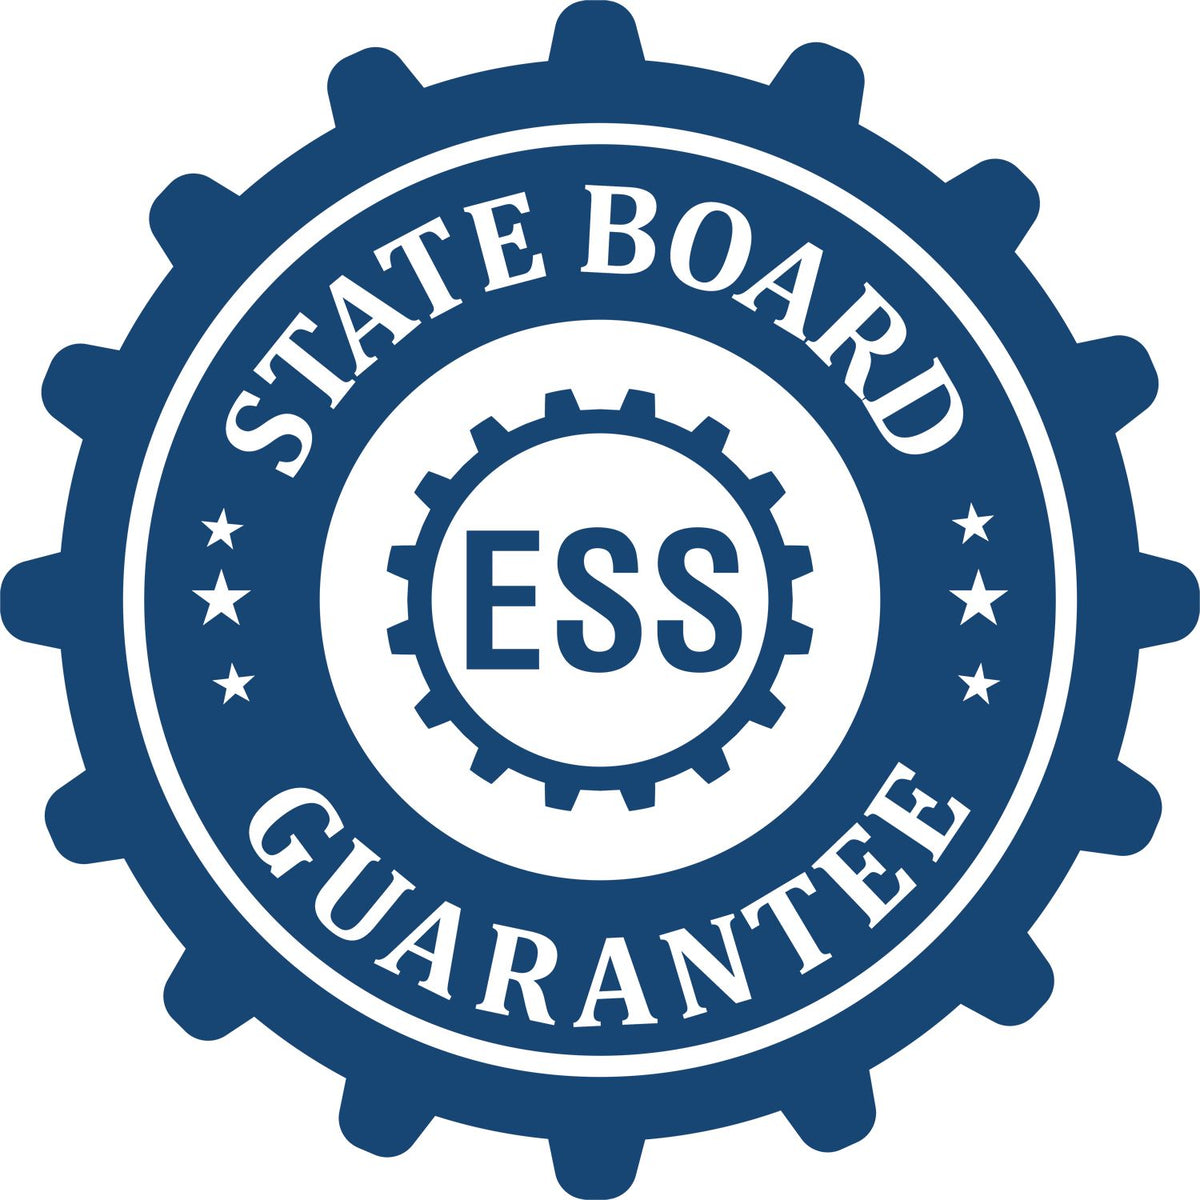 An emblem in a gear shape illustrating a state board guarantee for the North Carolina Engineer Desk Seal product.